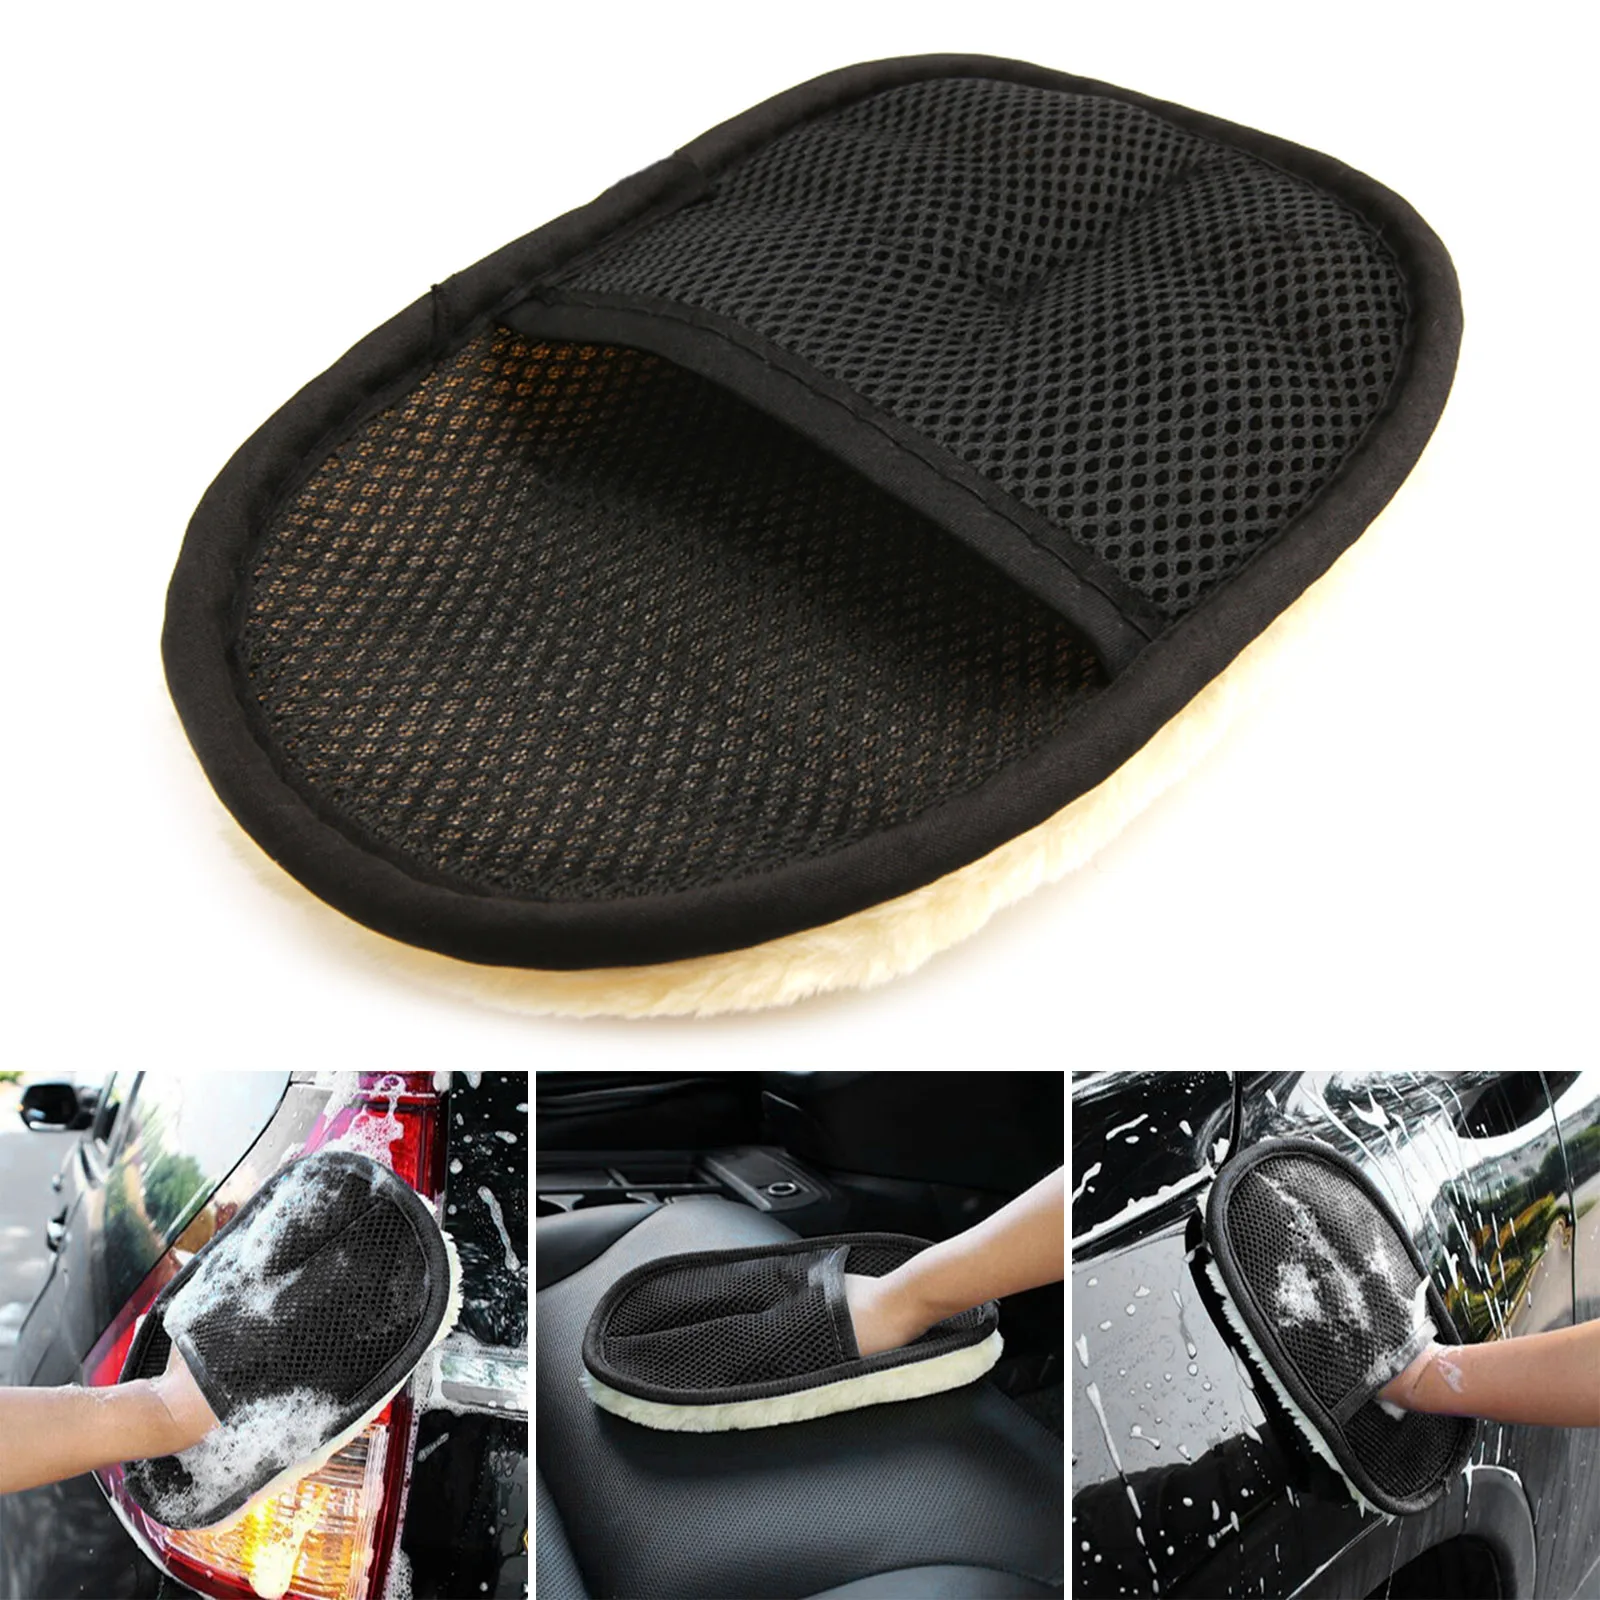 Single-sided Wool Soft cashmere Car Wash Glove Cleaning Mitt Washing Brush Cloth Motorcycle Washer Care Car Cleaning Too